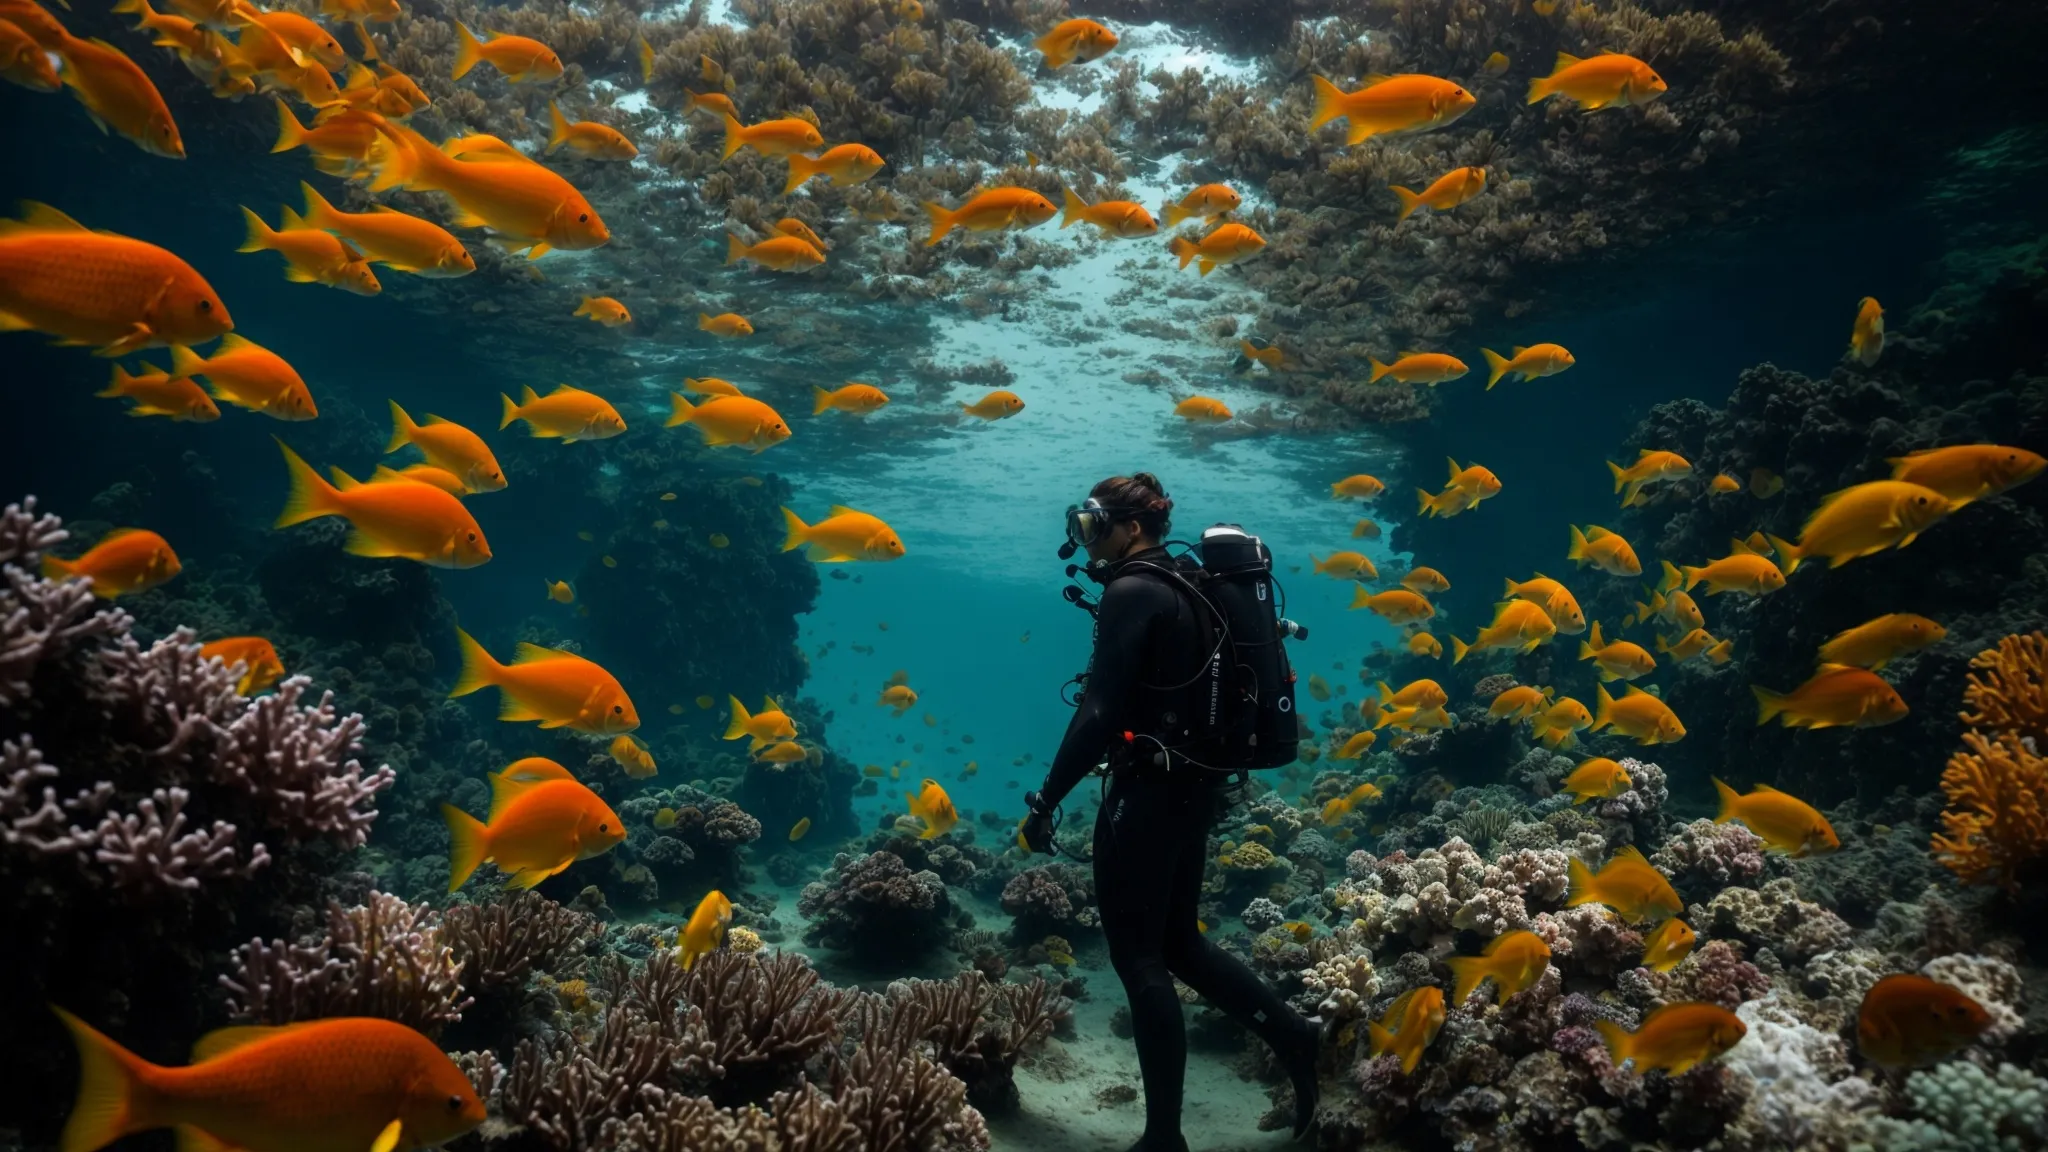 a person in diving gear explores the vibrant aquatic underworld among coral reefs and schools of fish.